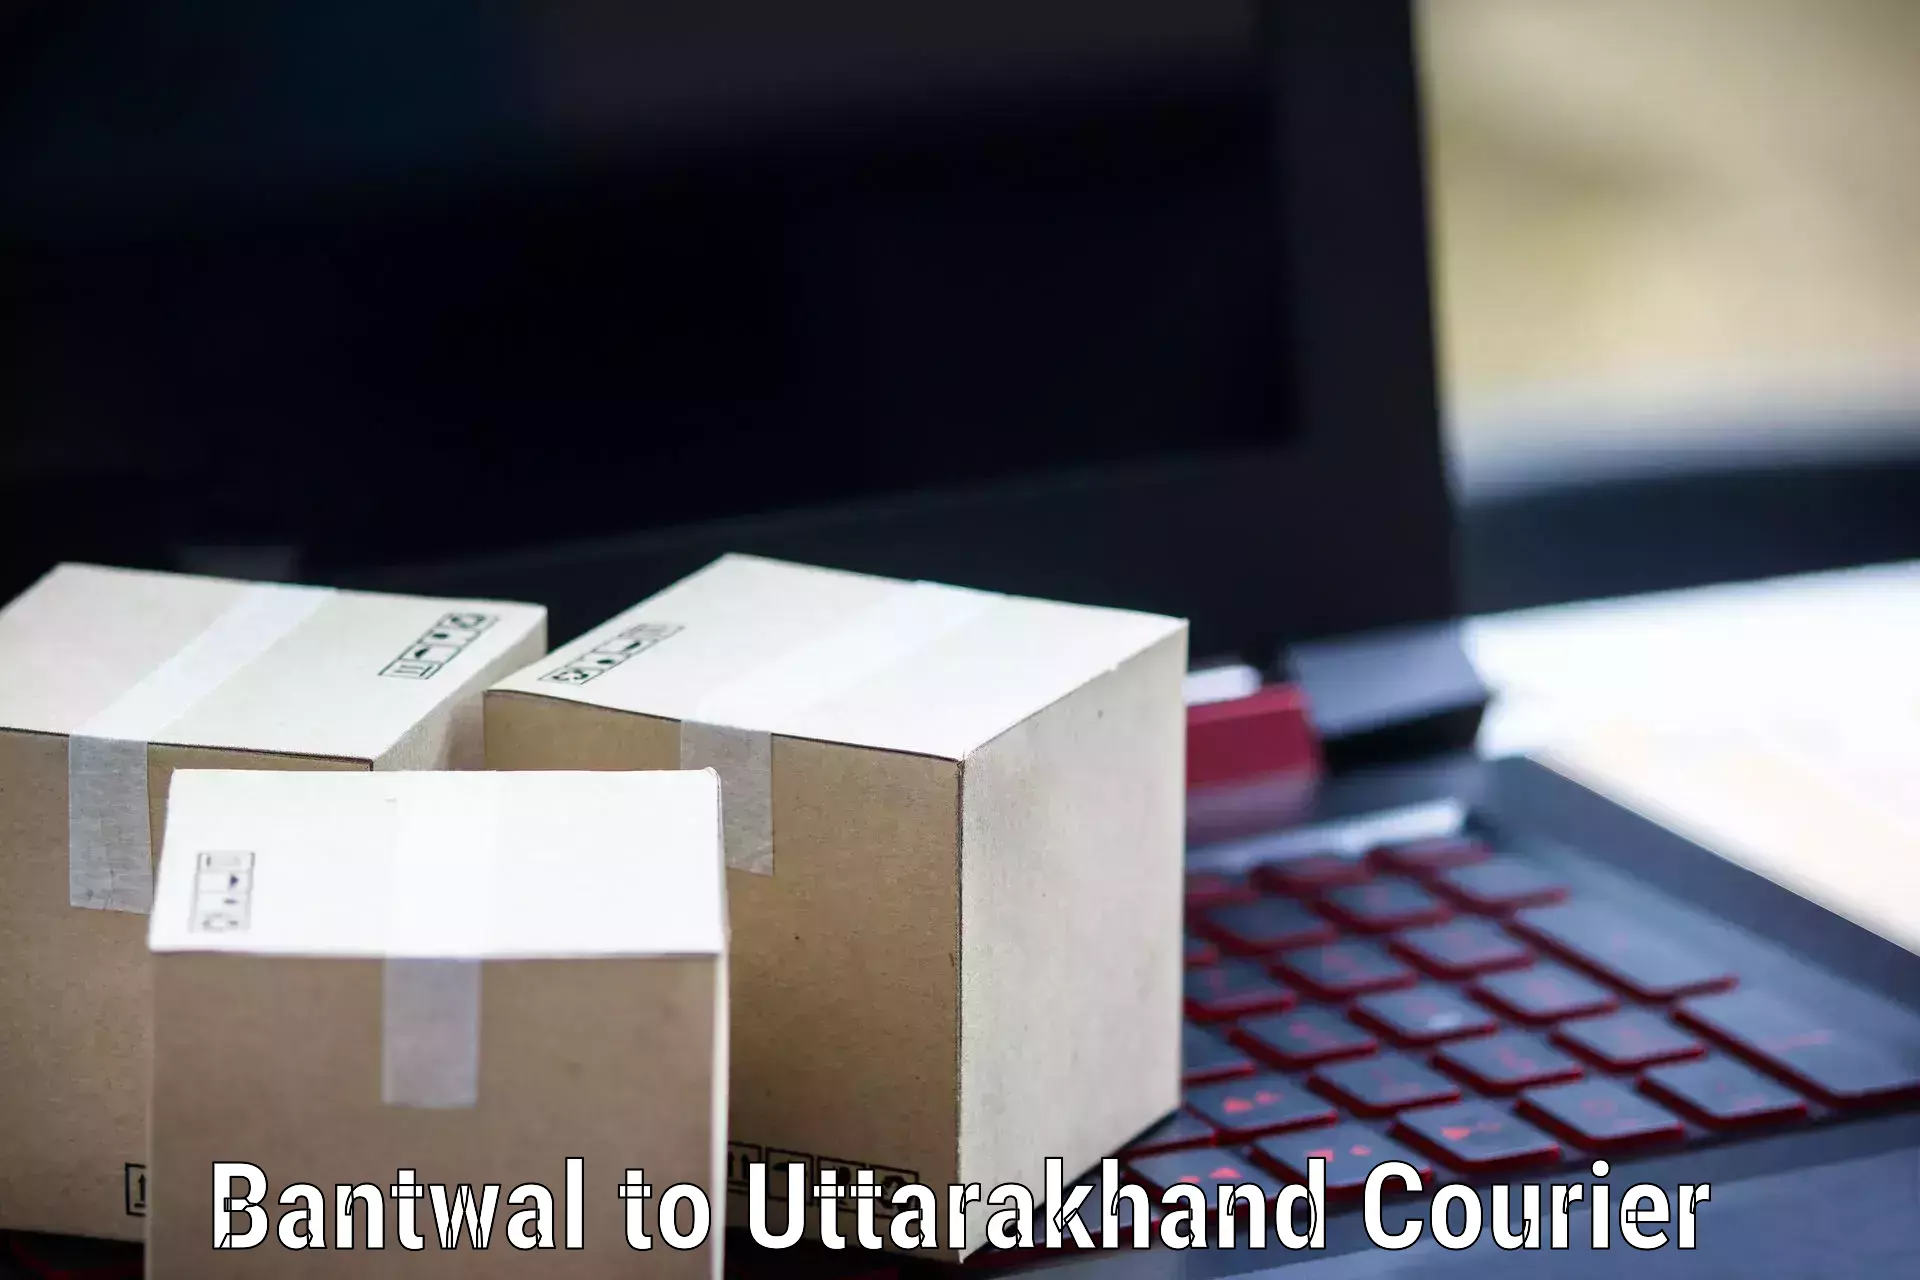 On-call courier service Bantwal to Pithoragarh